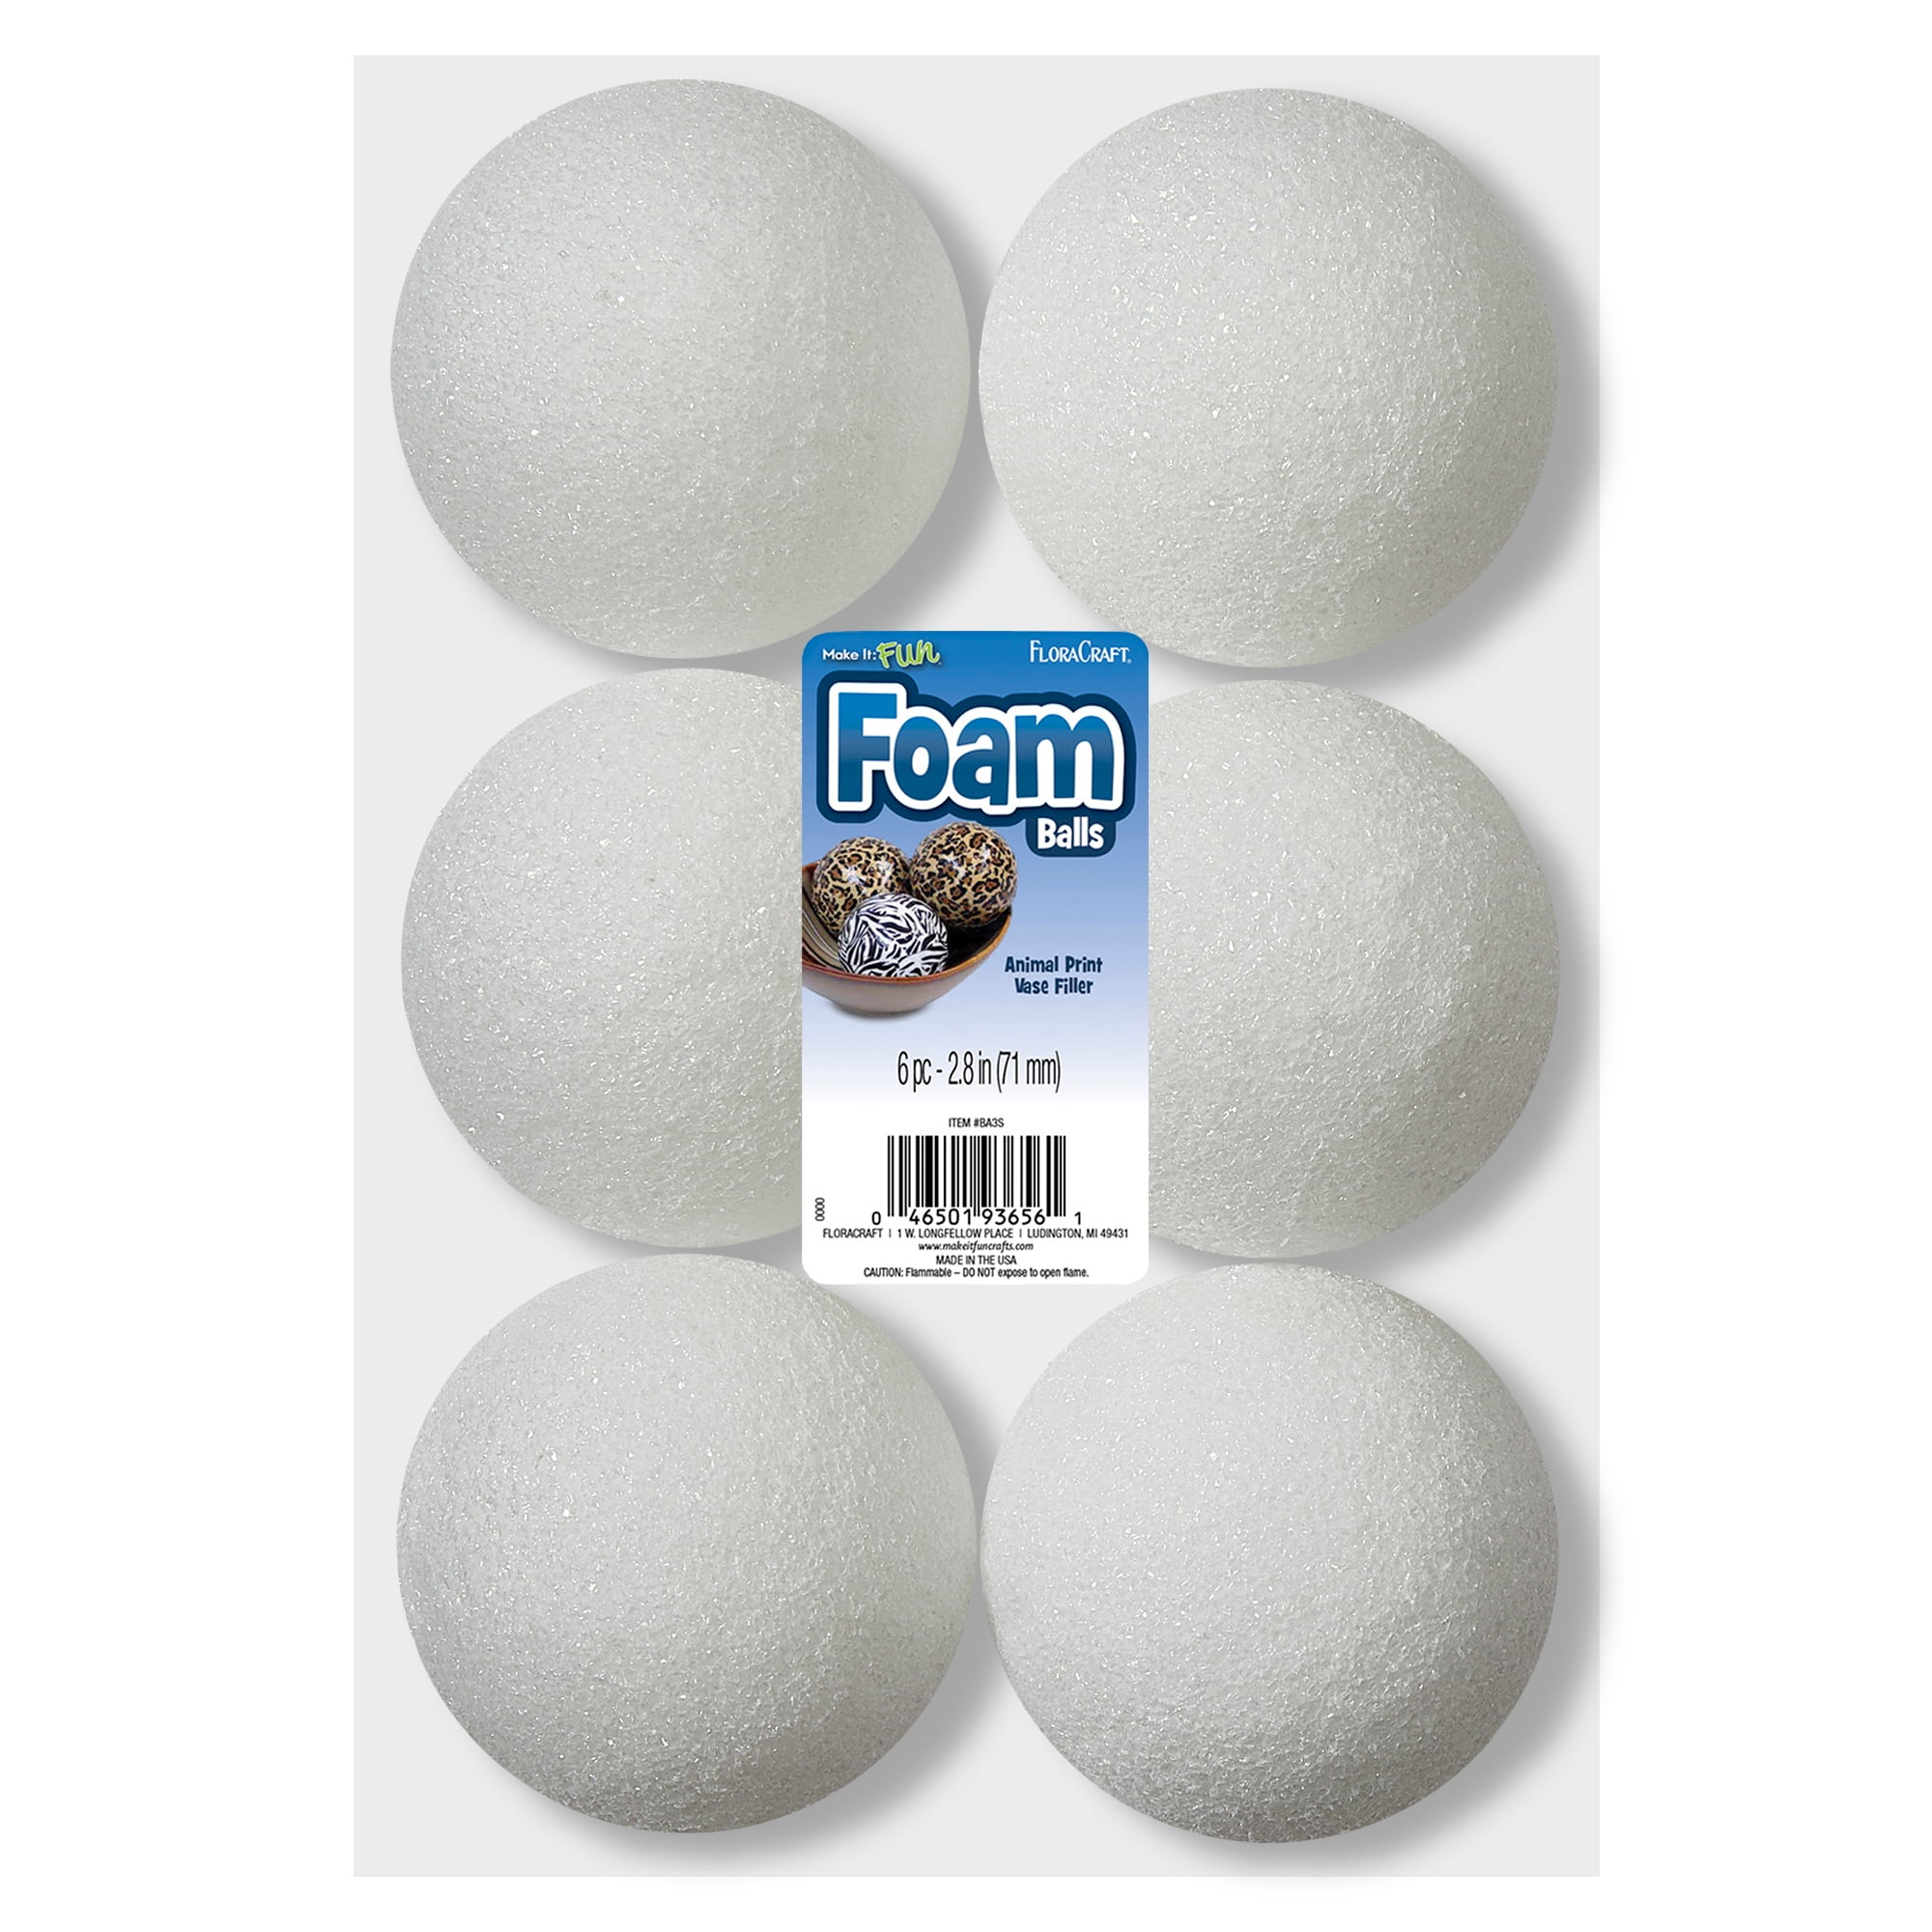  Smooth Foam 6-inch Ball for Crafts - Bulk 8 Pack - Plasteel  Brand - Made in The USA